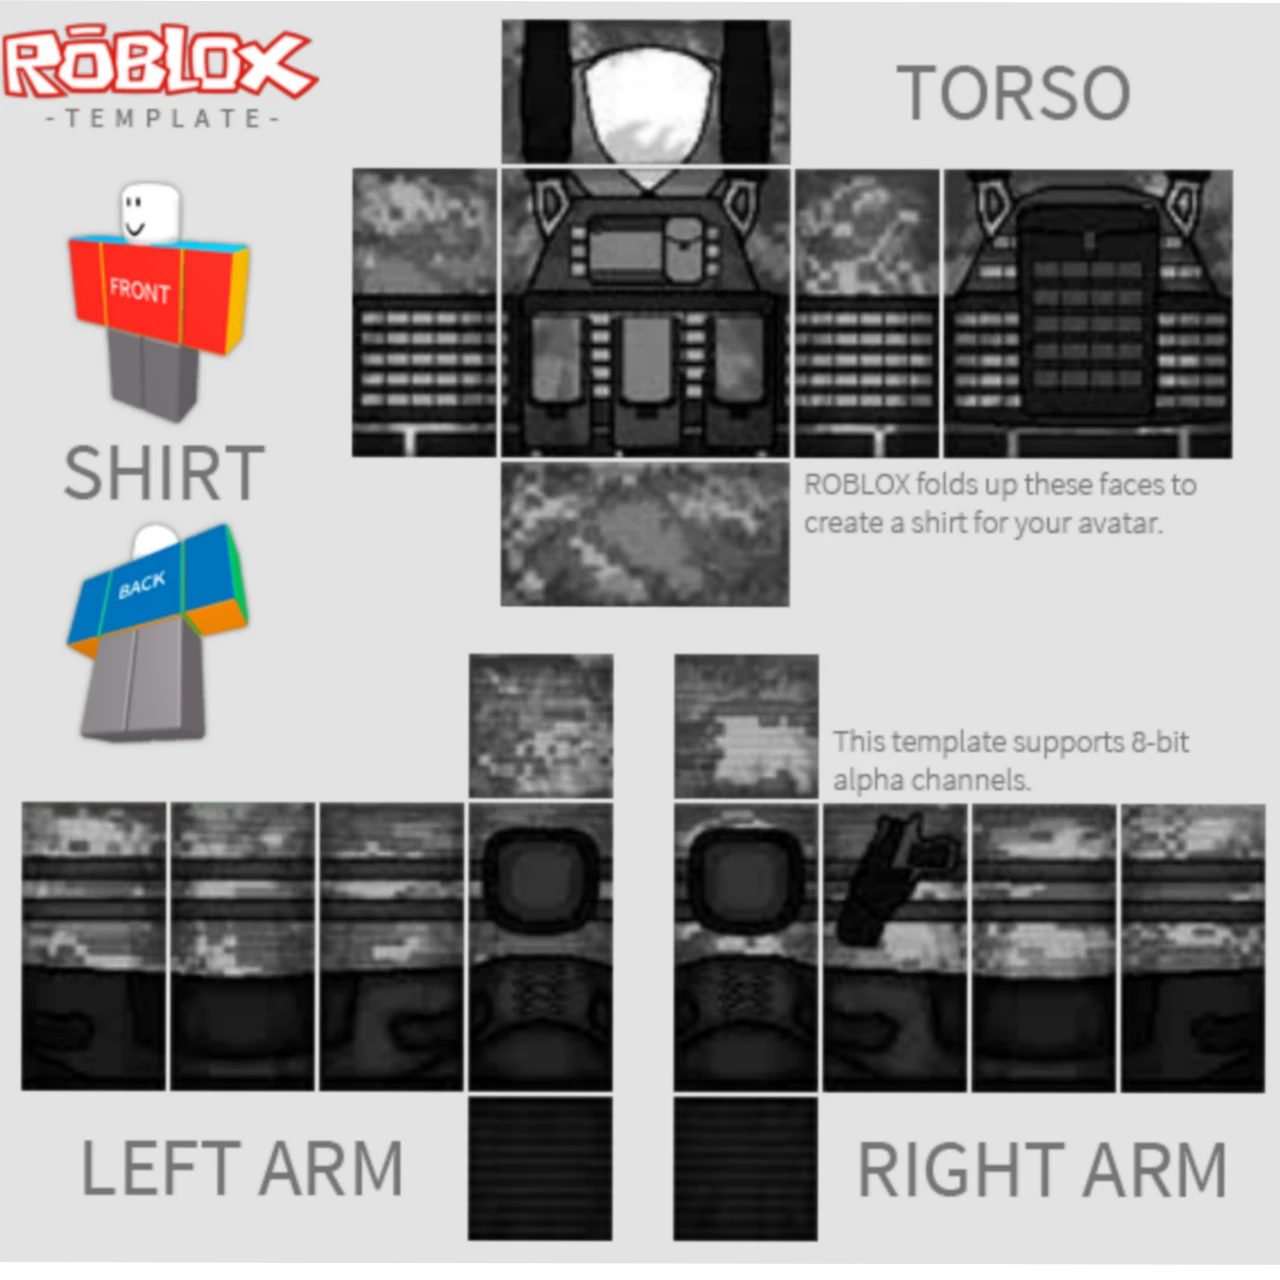 Roblox Template Swat Shirt Image By Guicorreia13795